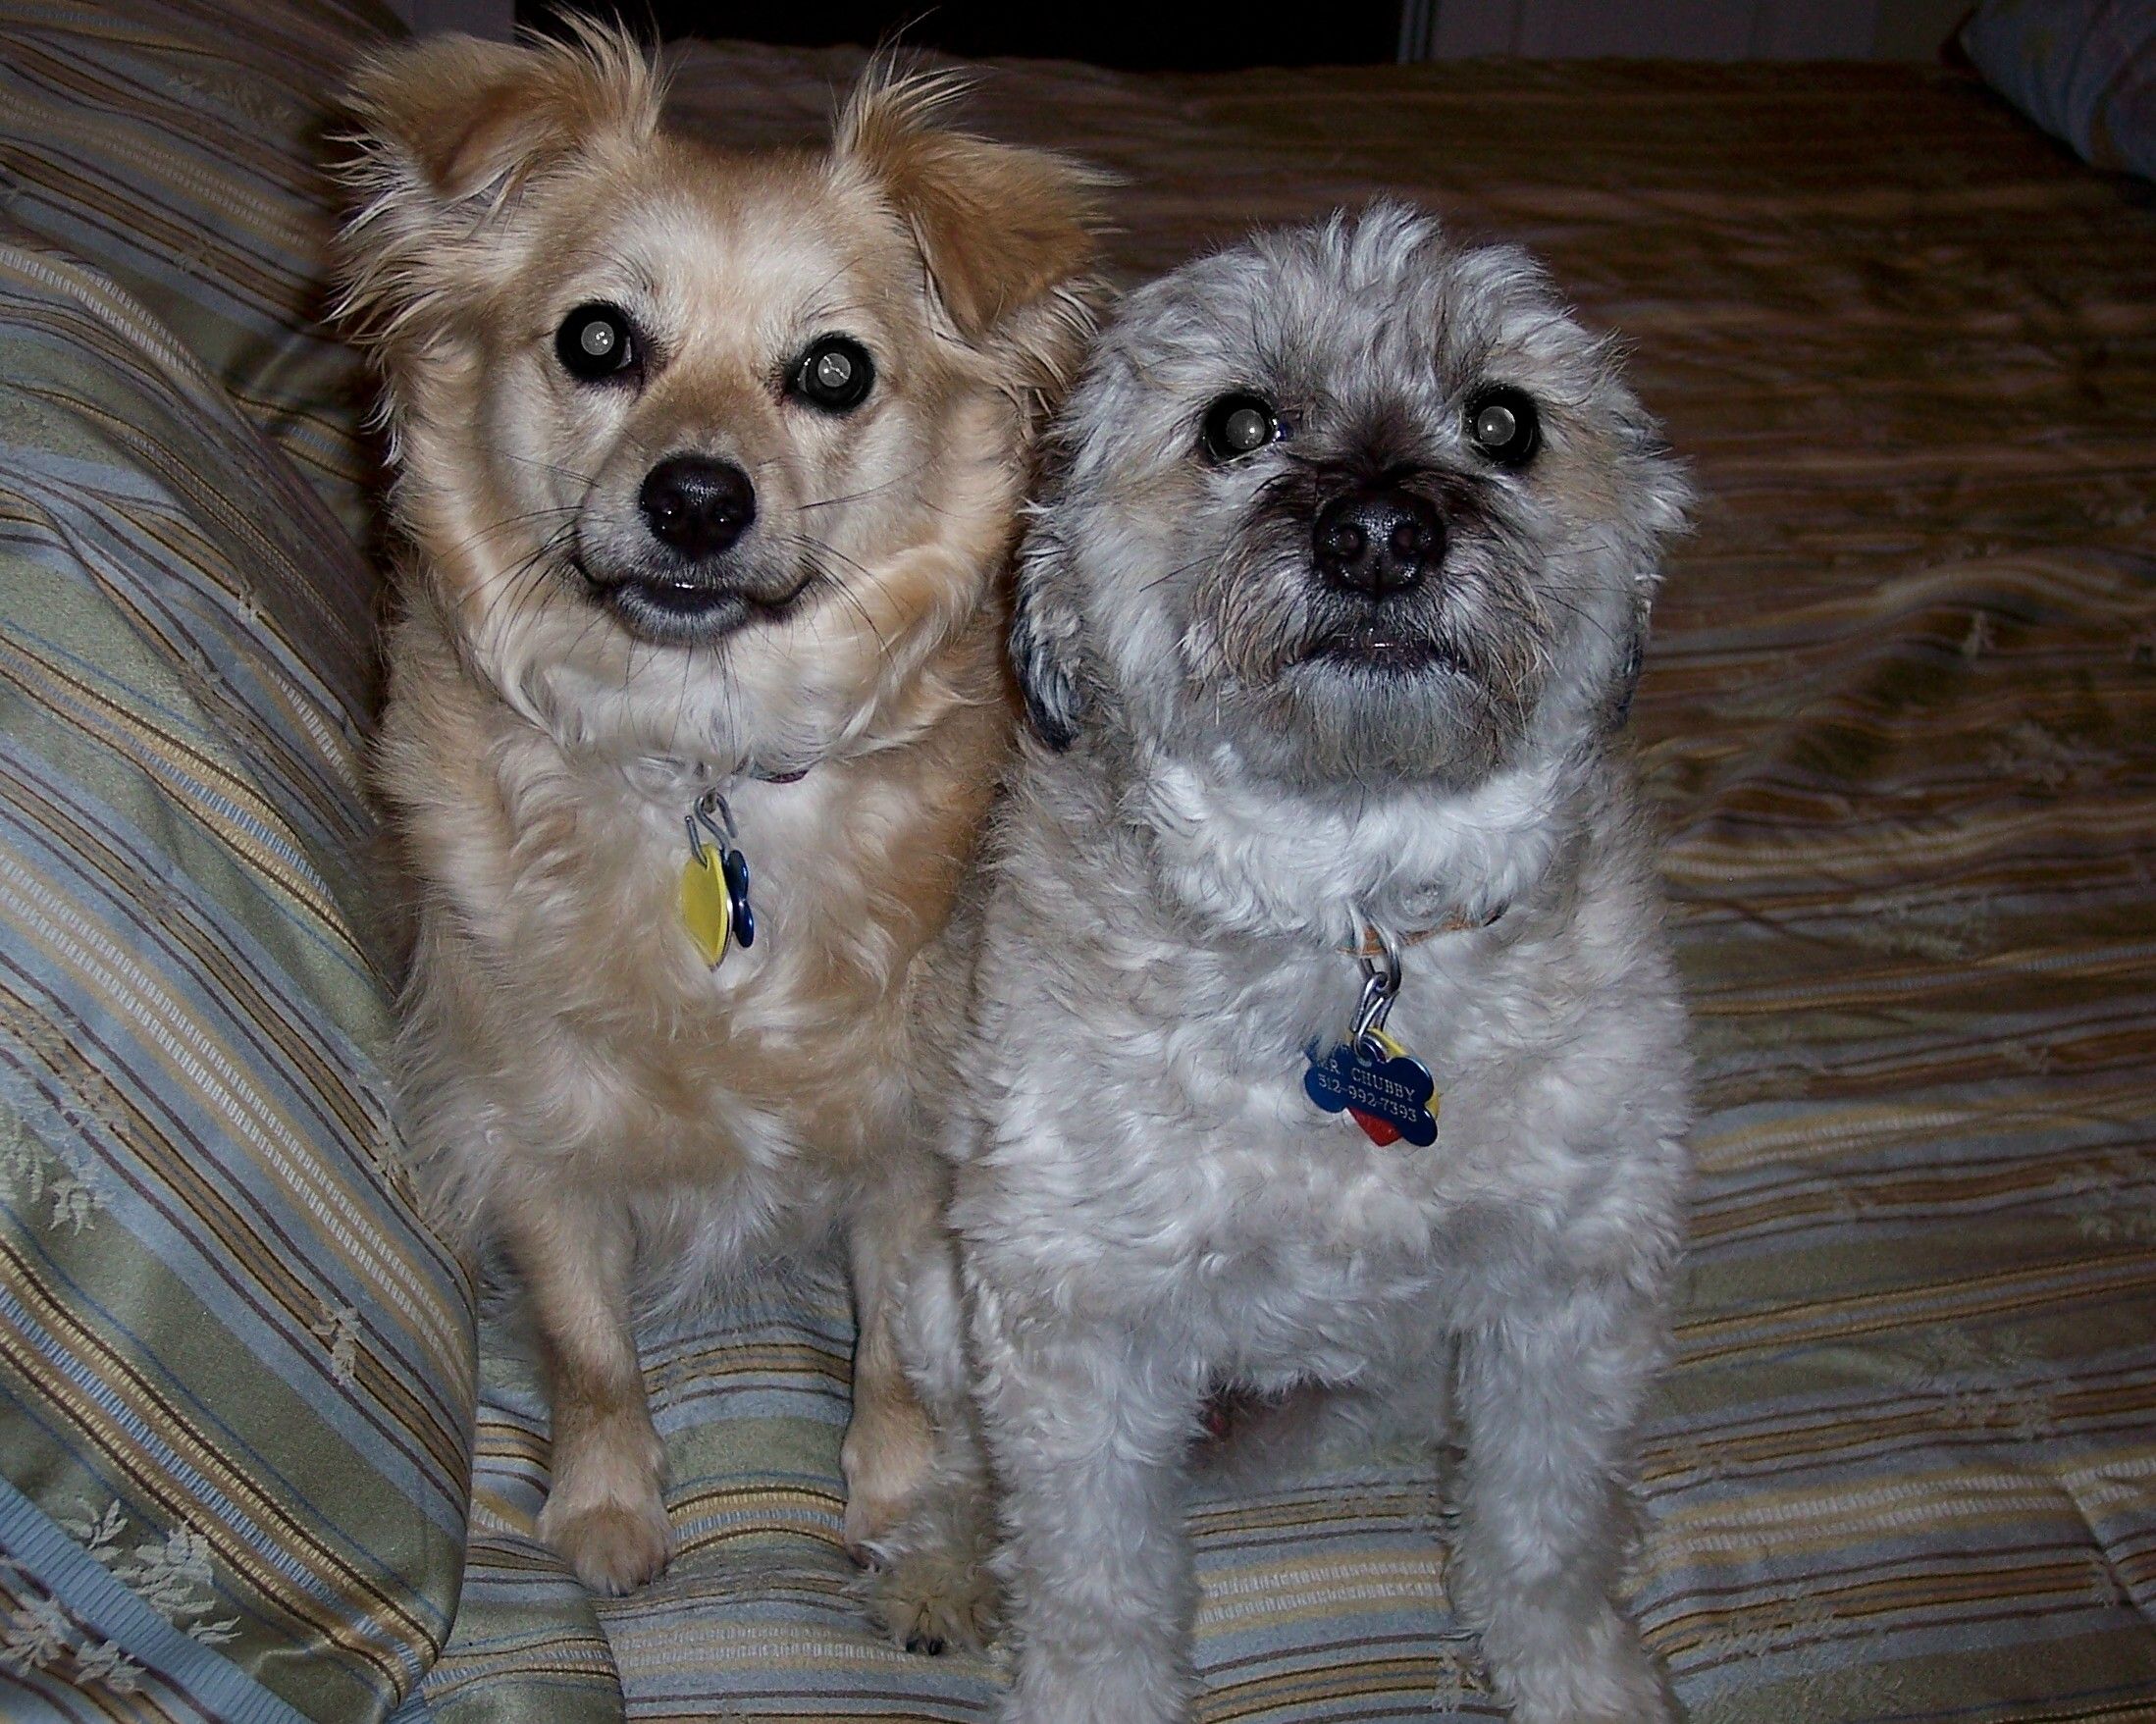 Binkie and Chubby, precious! Two dogs that got a fenced in yard and a garage!